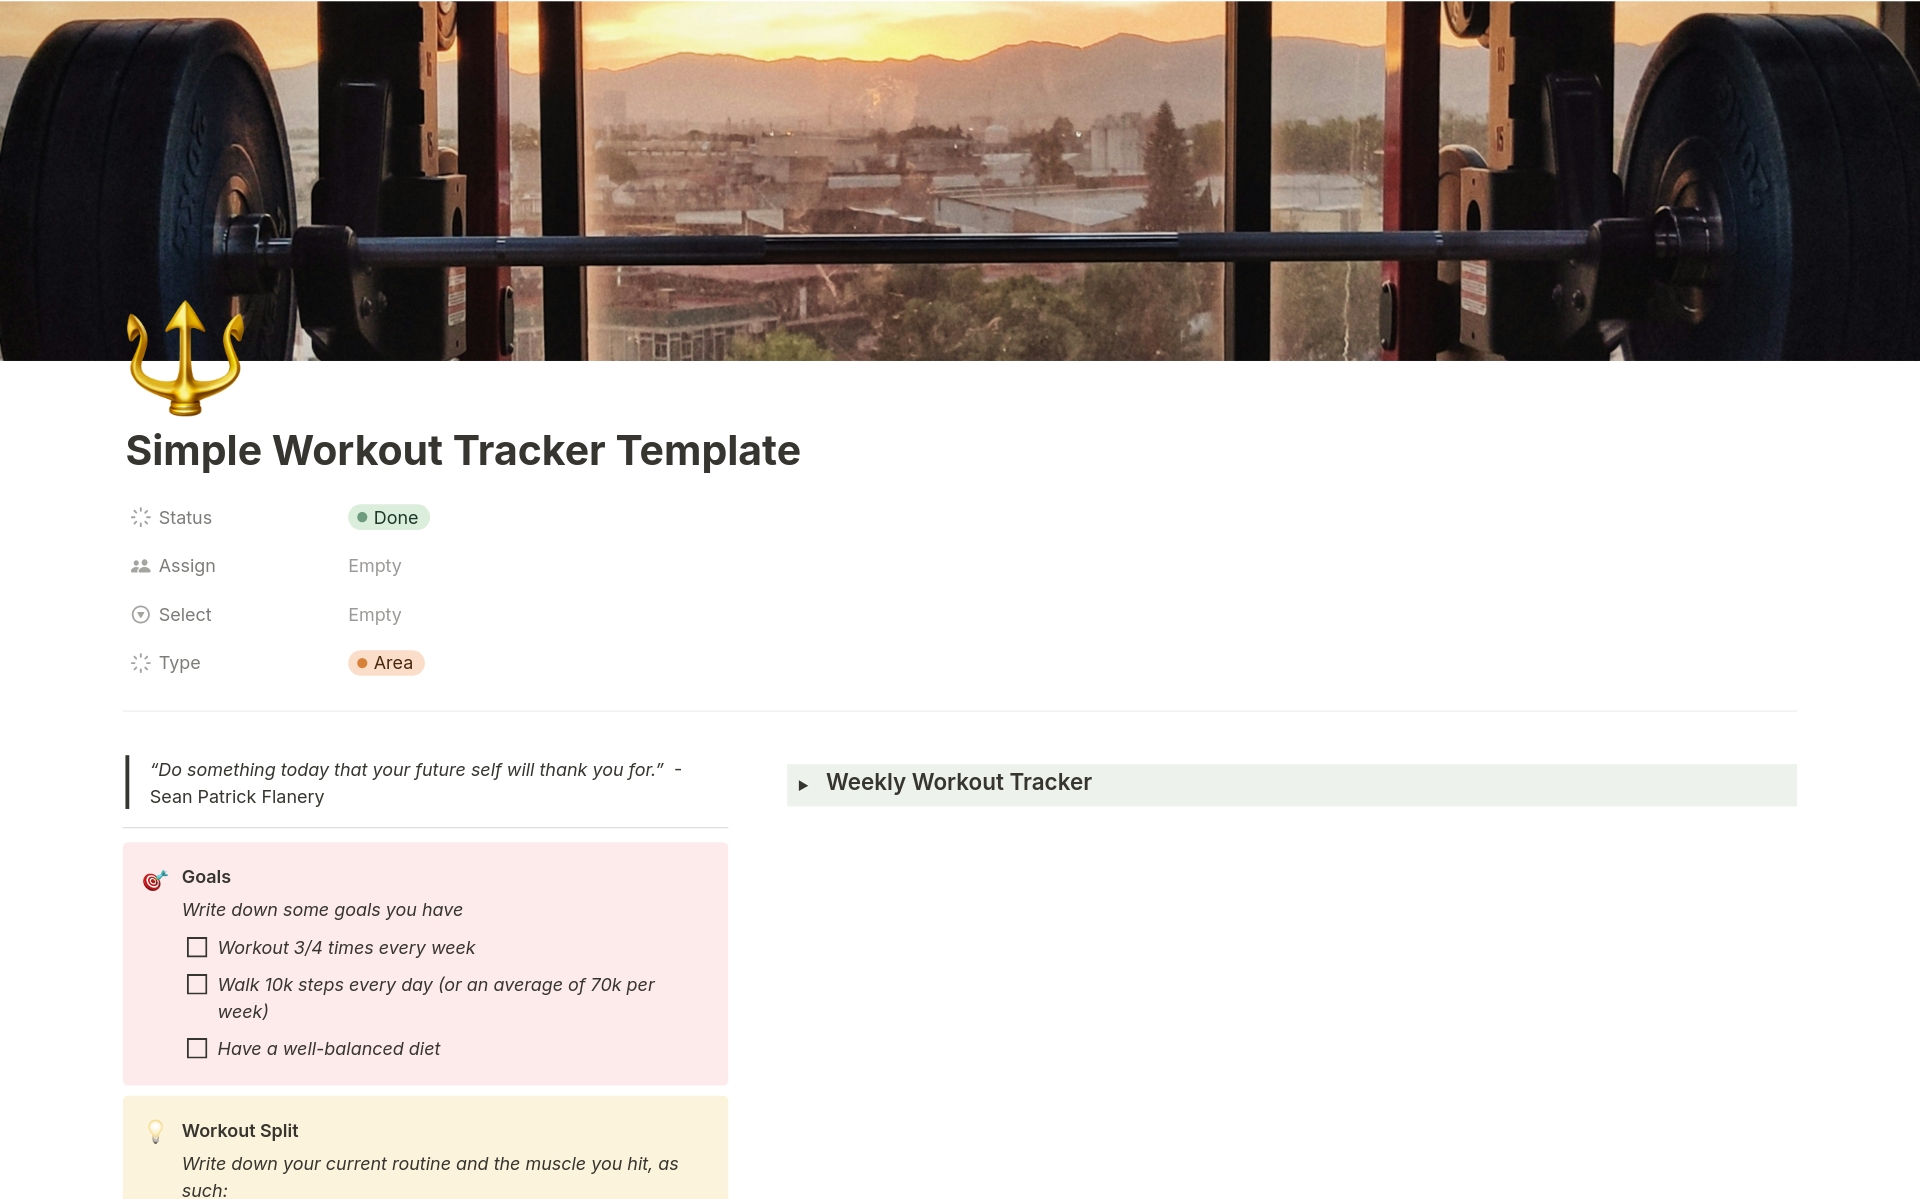 Ready to take control of your fitness journey? Duplicate my Simple Workout Tracker Template on Notion FOR FREE today and start making progress towards your fitness goals💪

Track your workouts, set intentions, and stay motivated with ease